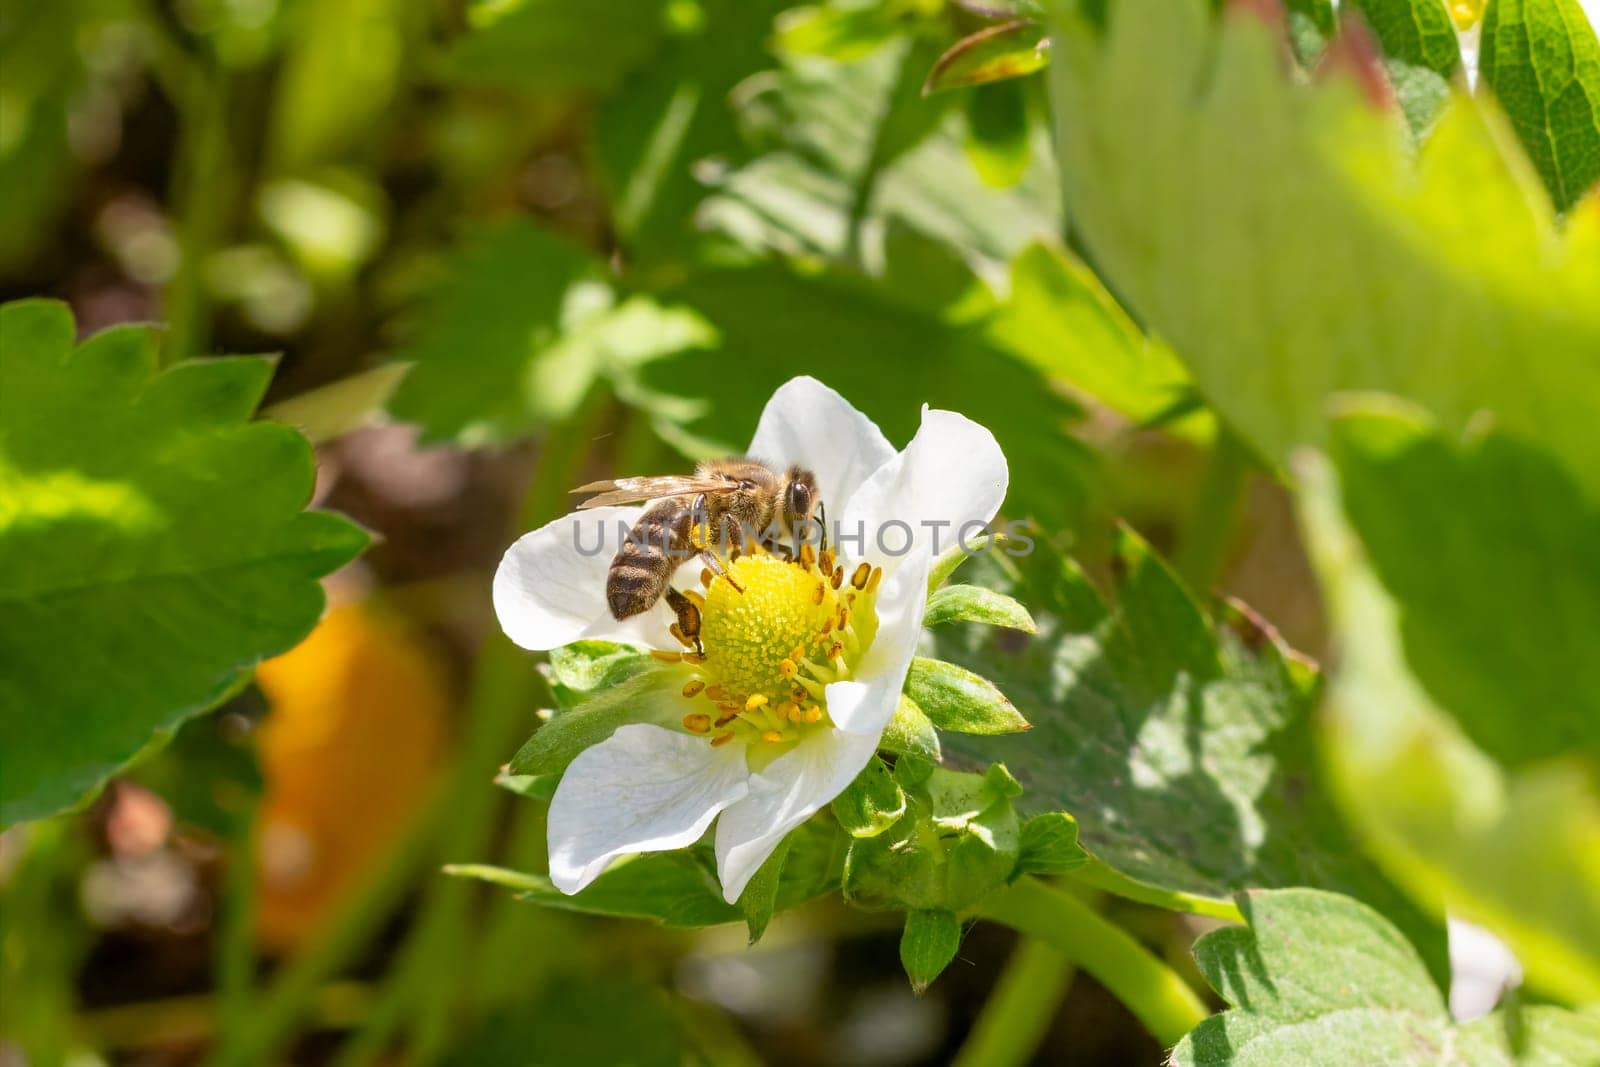 Close-up a flowering strawberry bush with a bee gathering pollen from a white flower. Cultivating berries in a garden.